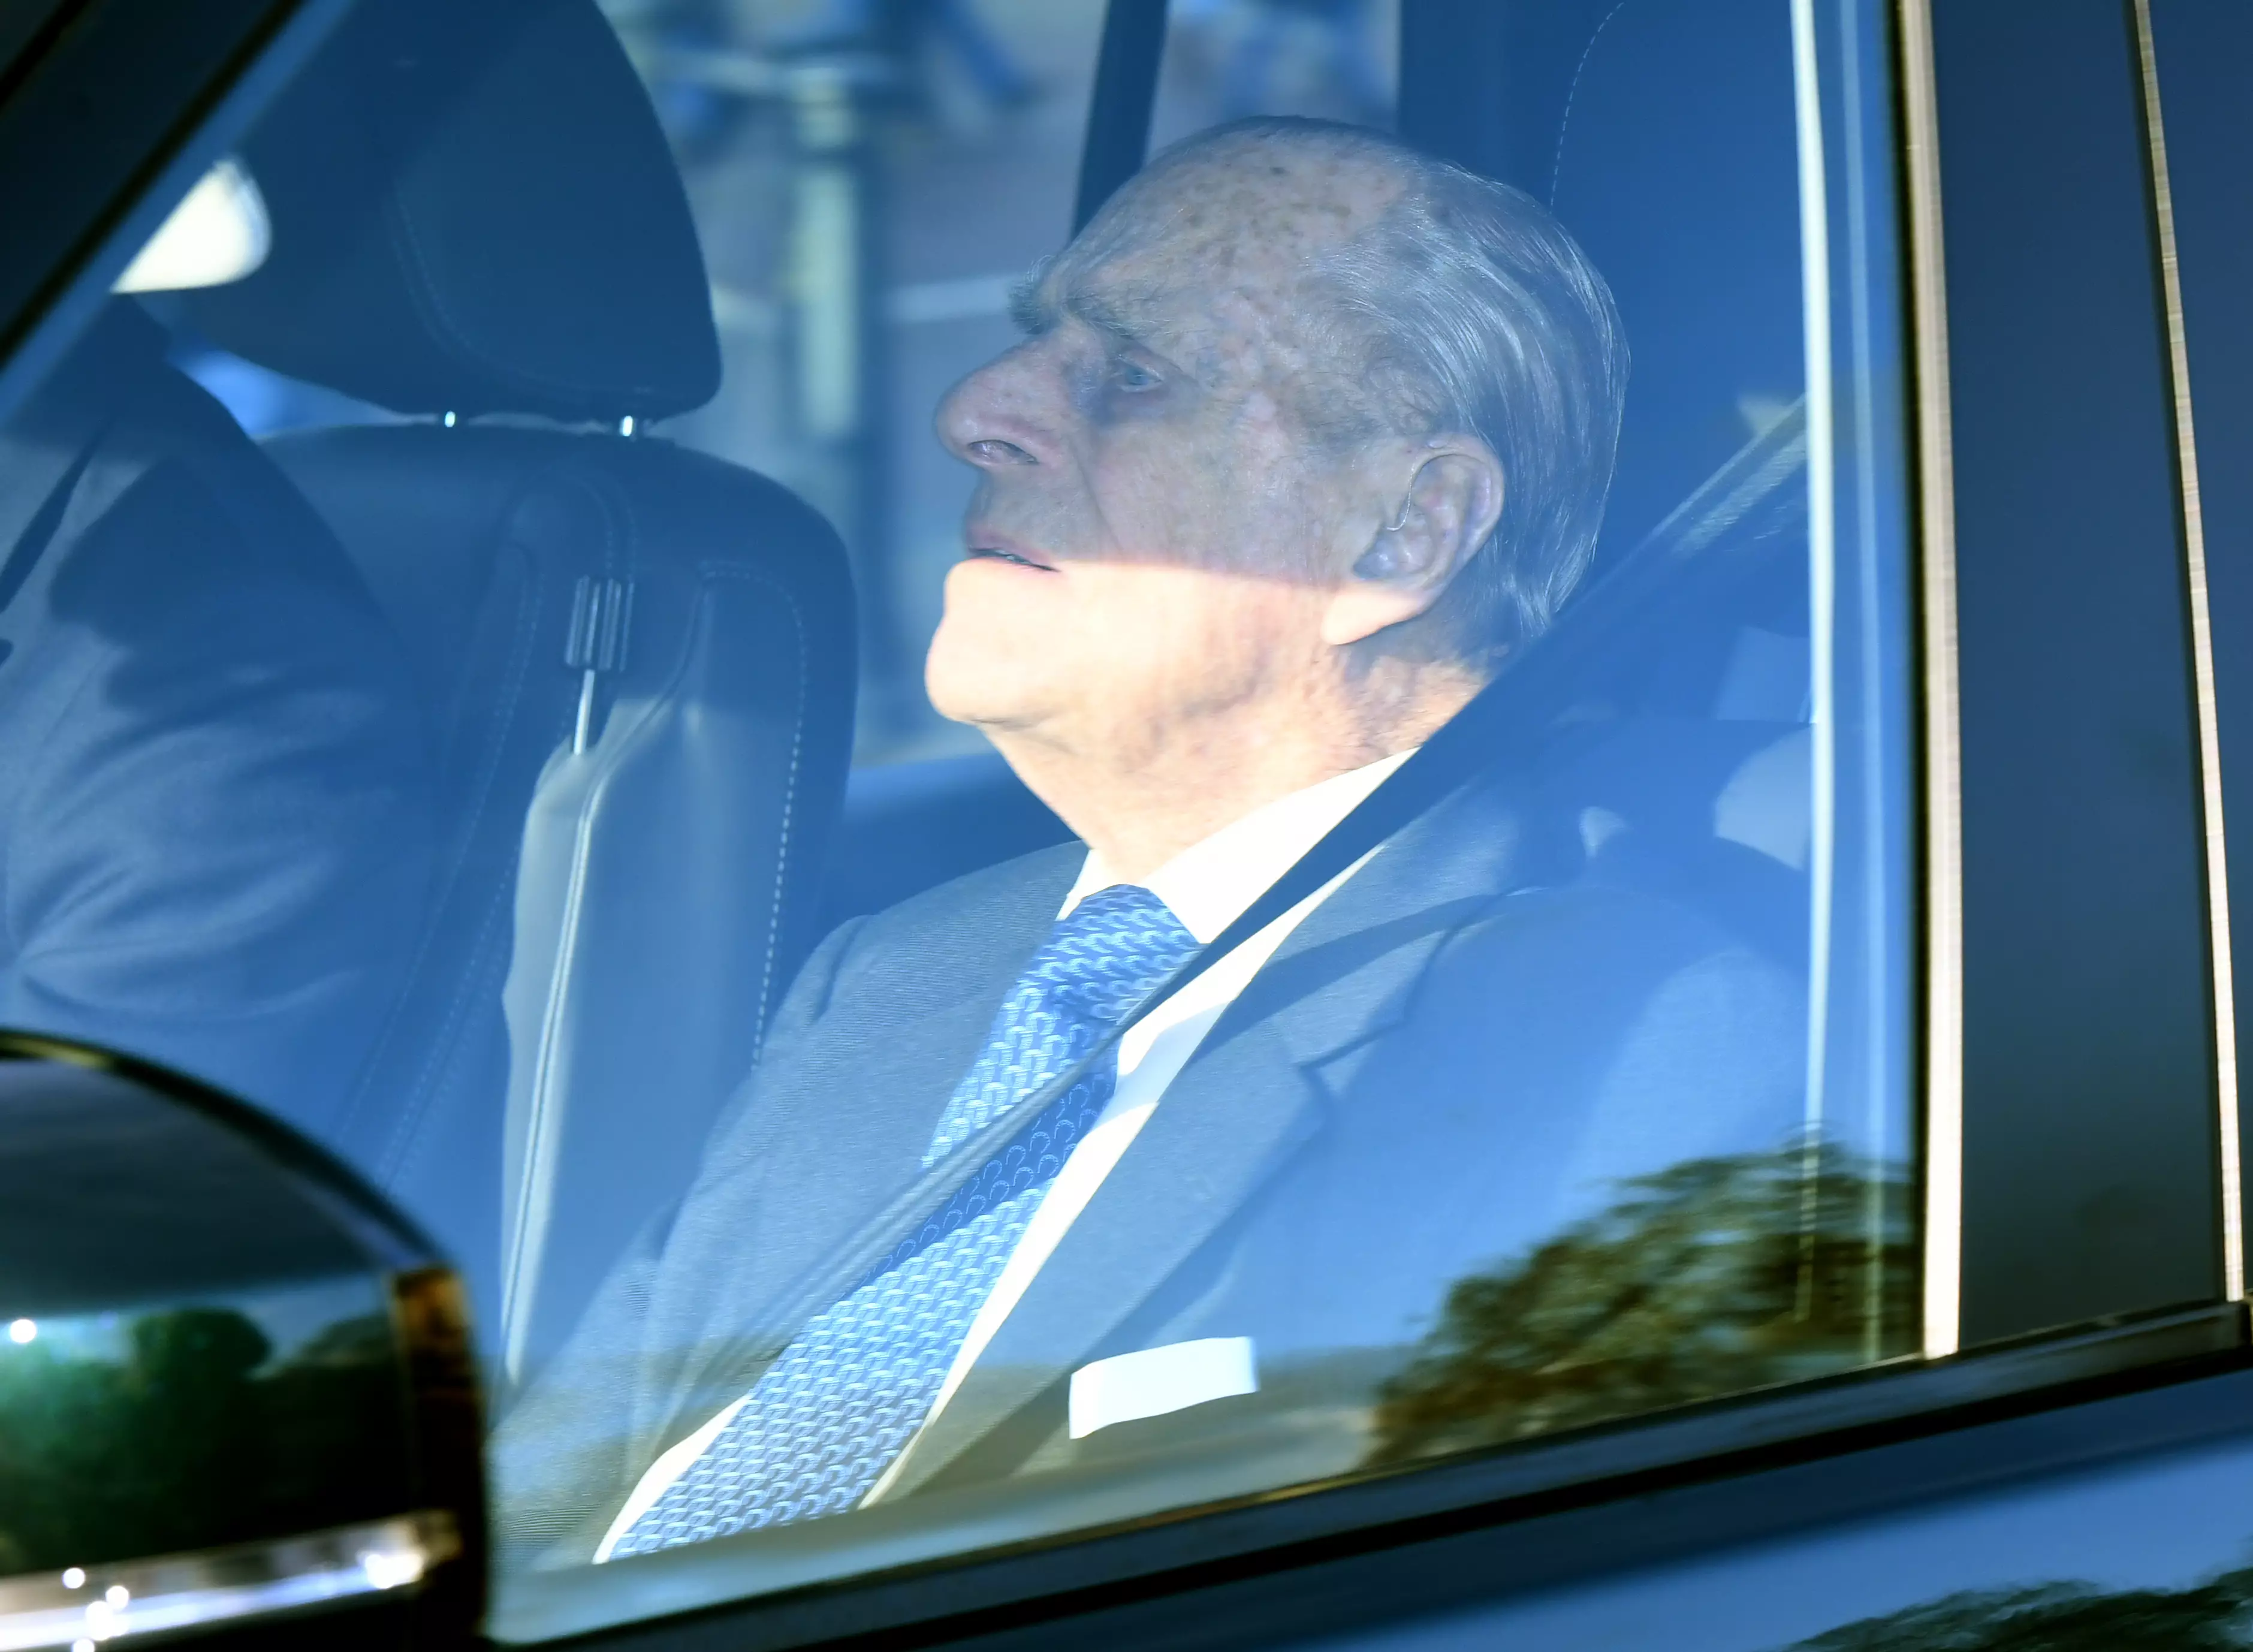 Prince Philip has been taken to hospital.